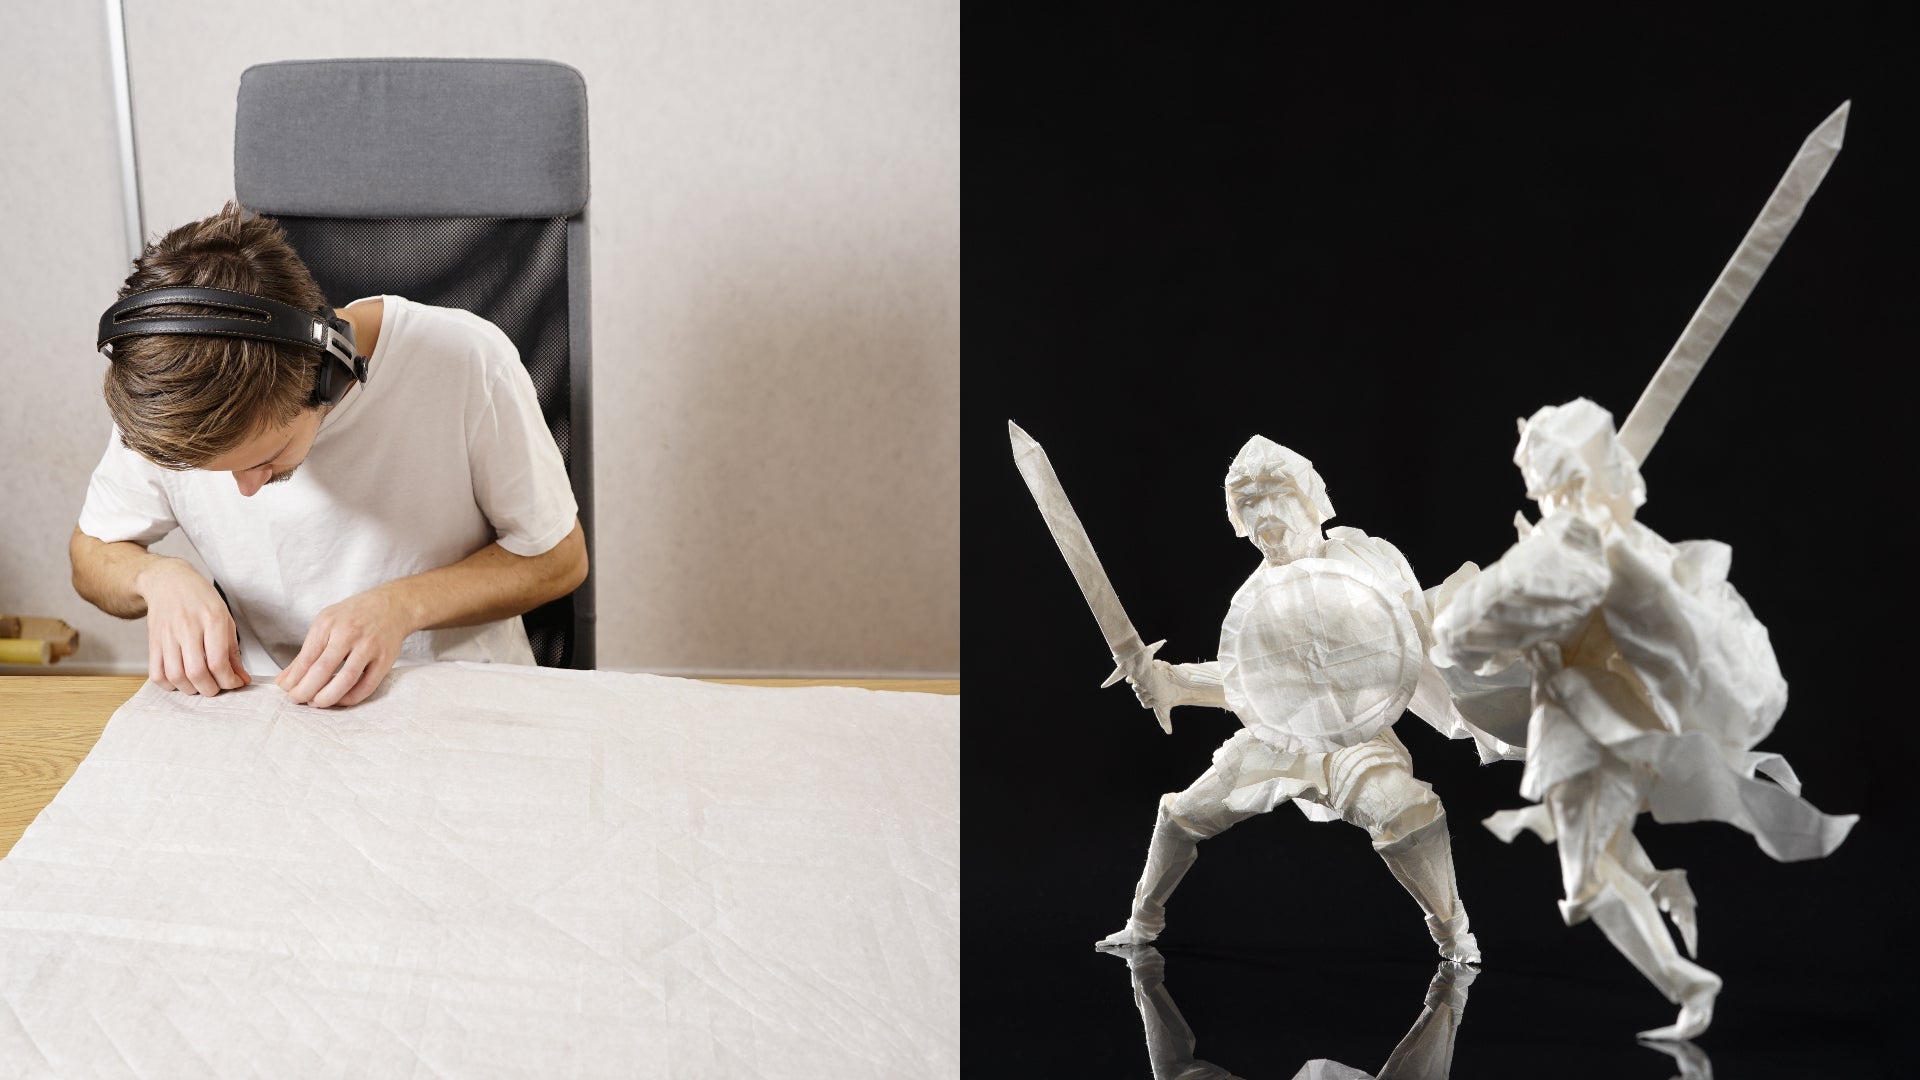 Juho Konkkola, an origami artist from Finland, has completed a two and a half year project which used just one sheet of paper and took 109 hours of folding (Juho Konkkola/PA)